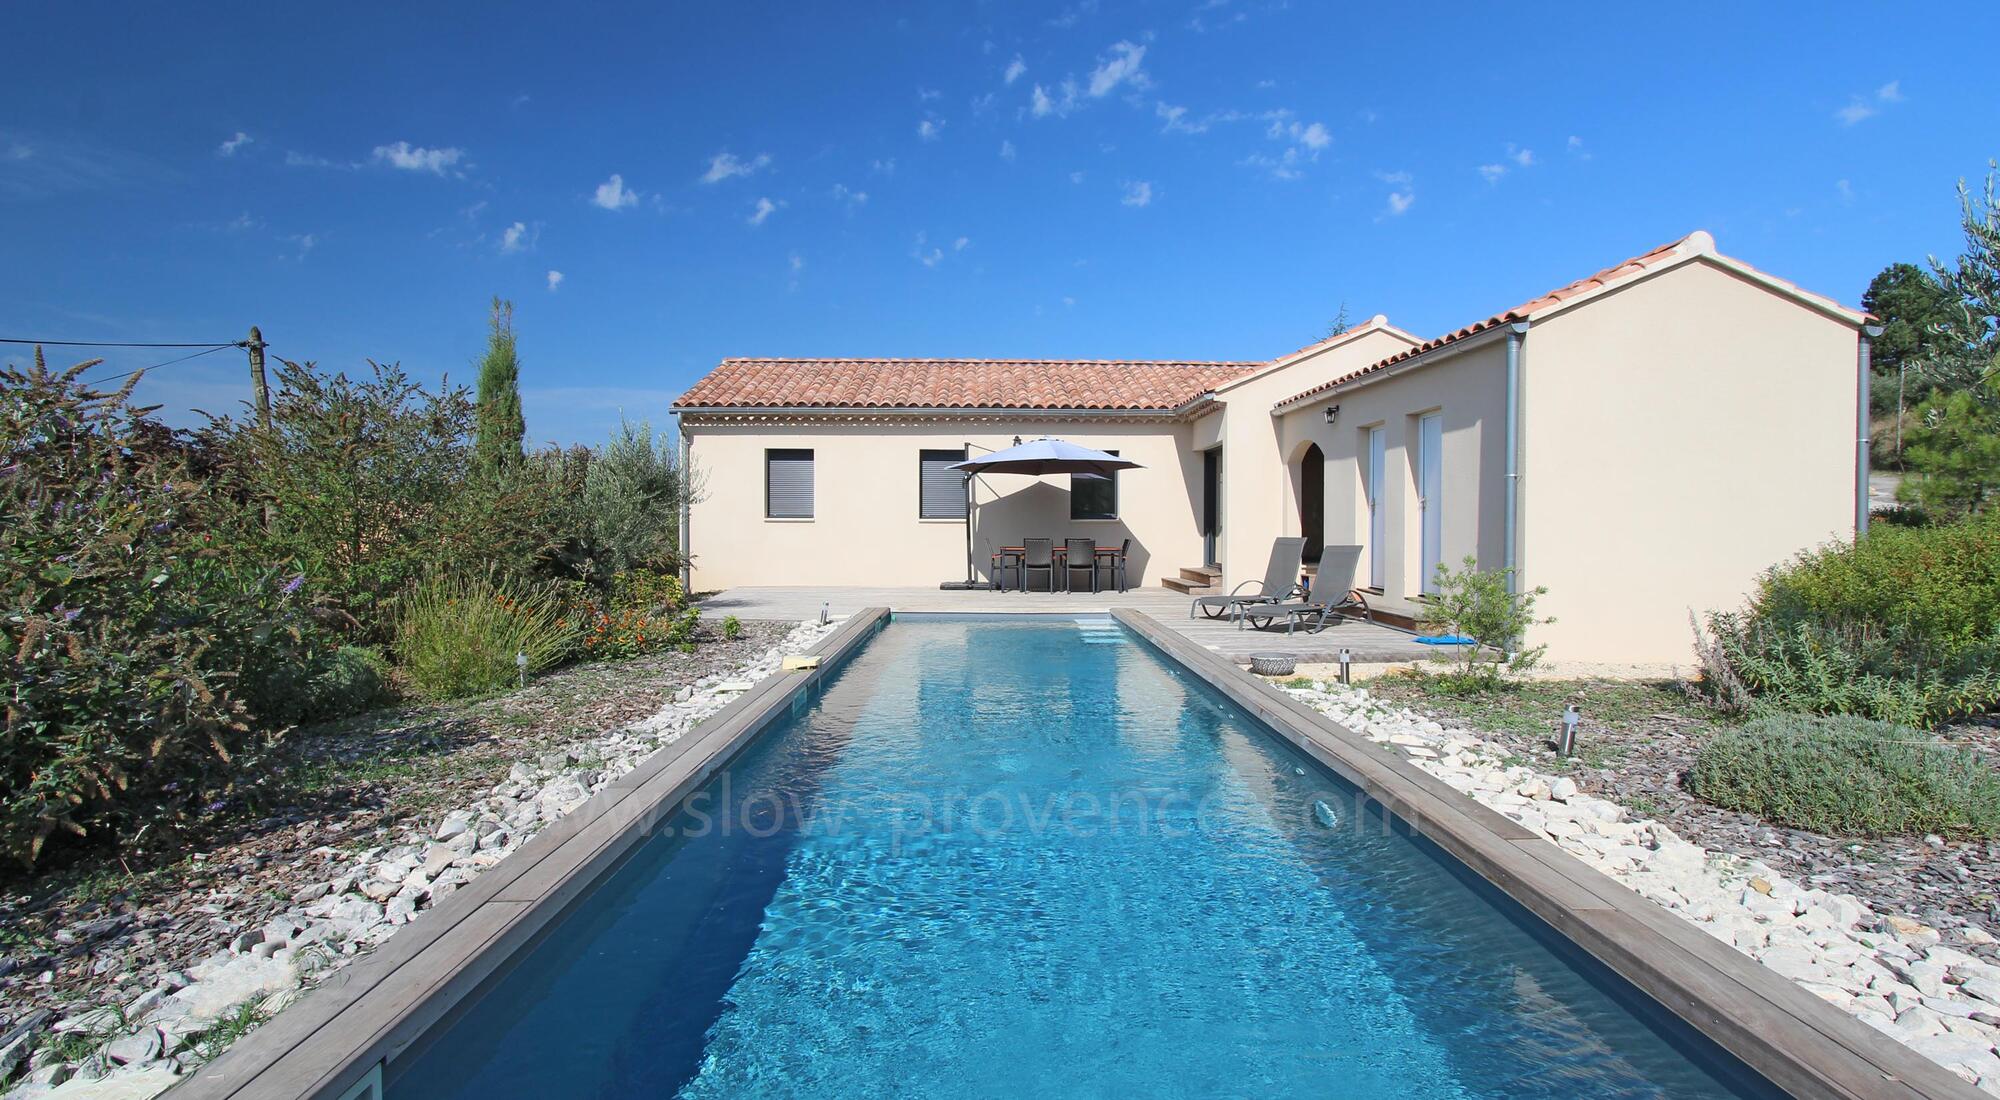 Nice villa at walking distance to the village of Bedoin